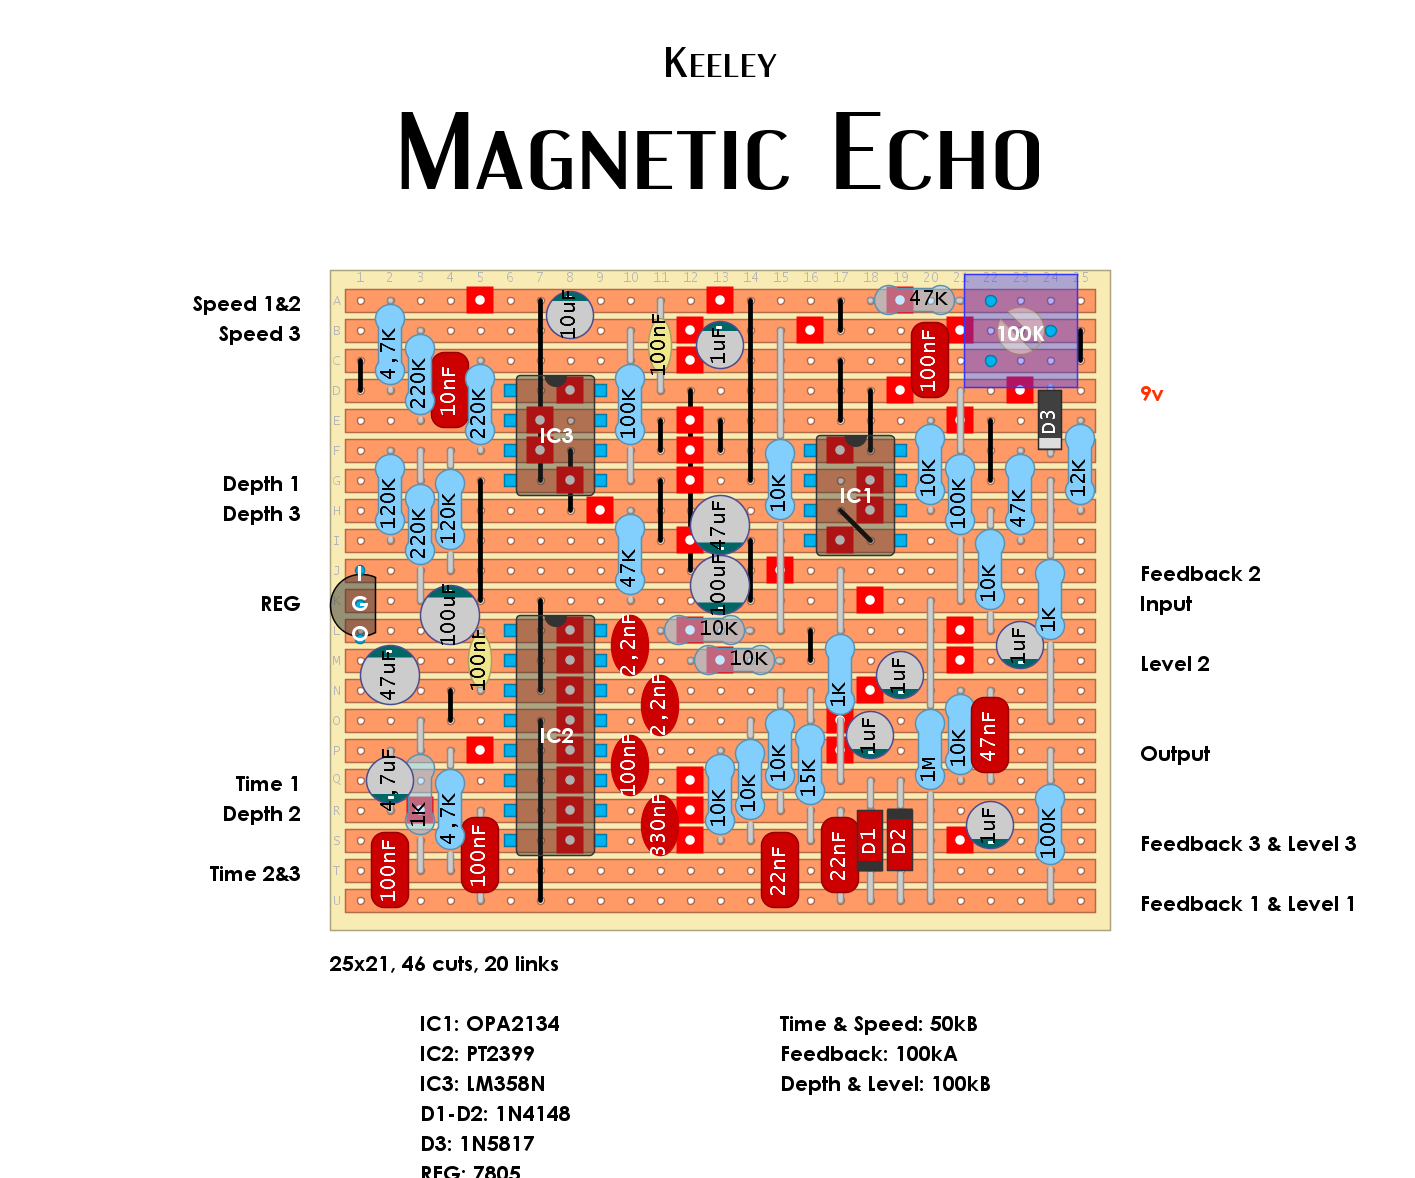 Dirtbox Layouts: Keeley Magnetic Echo